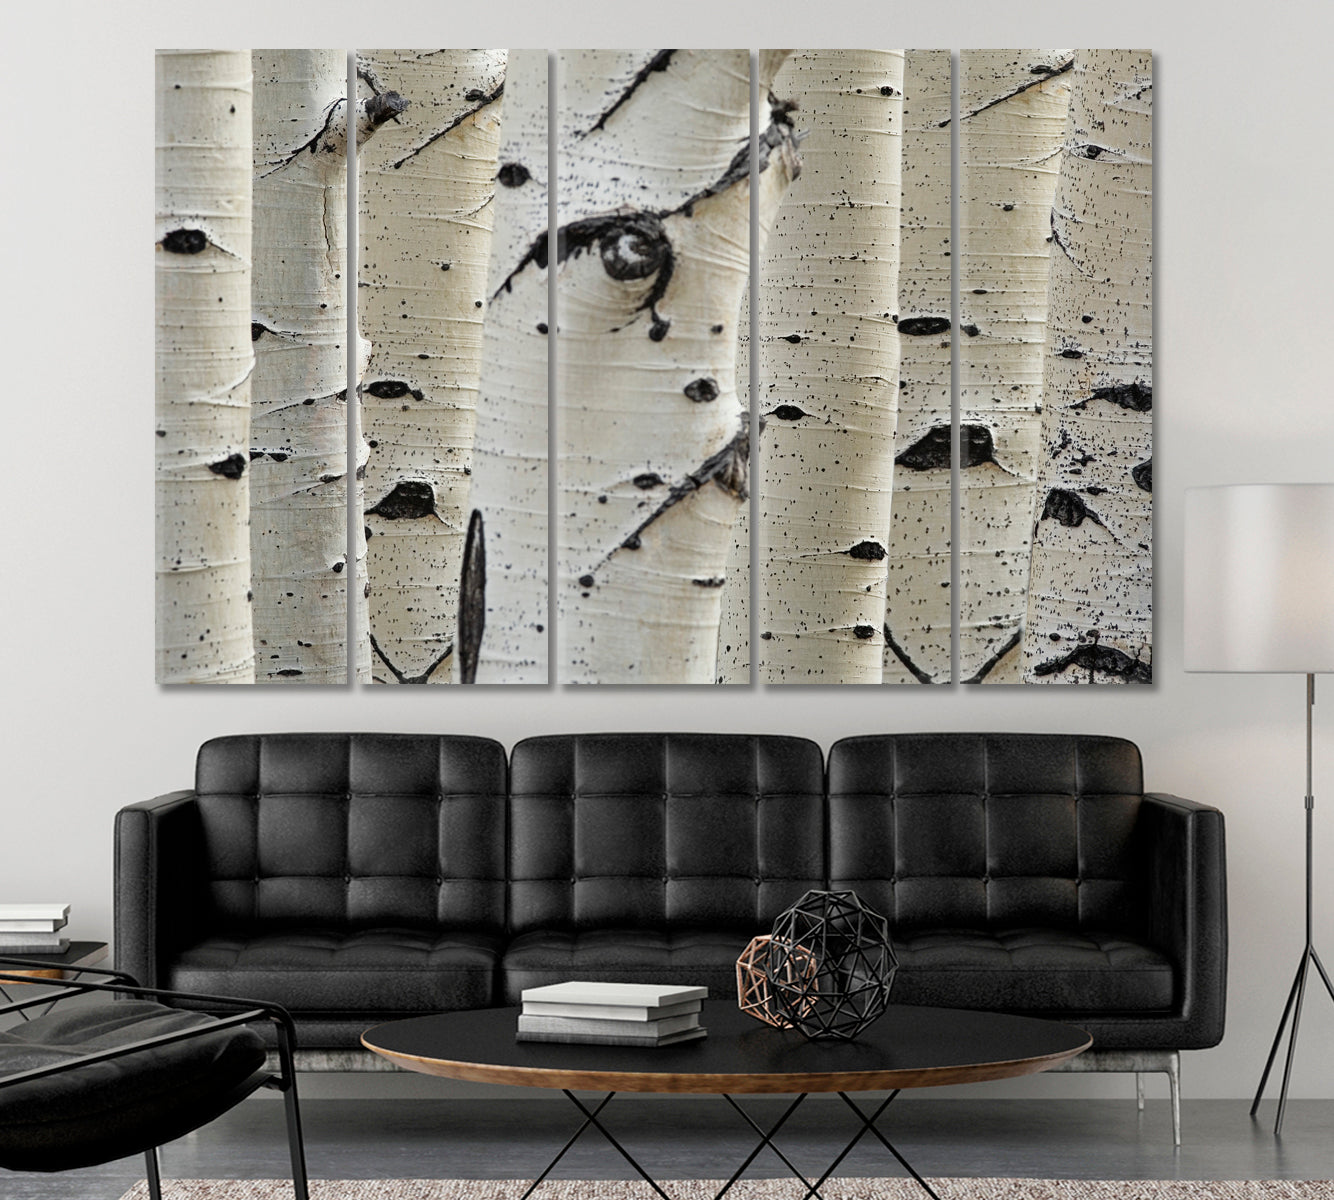 Birch Trees Row Close-up Trunks Nature Wall Canvas Print Artesty 5 panels 36" x 24" 